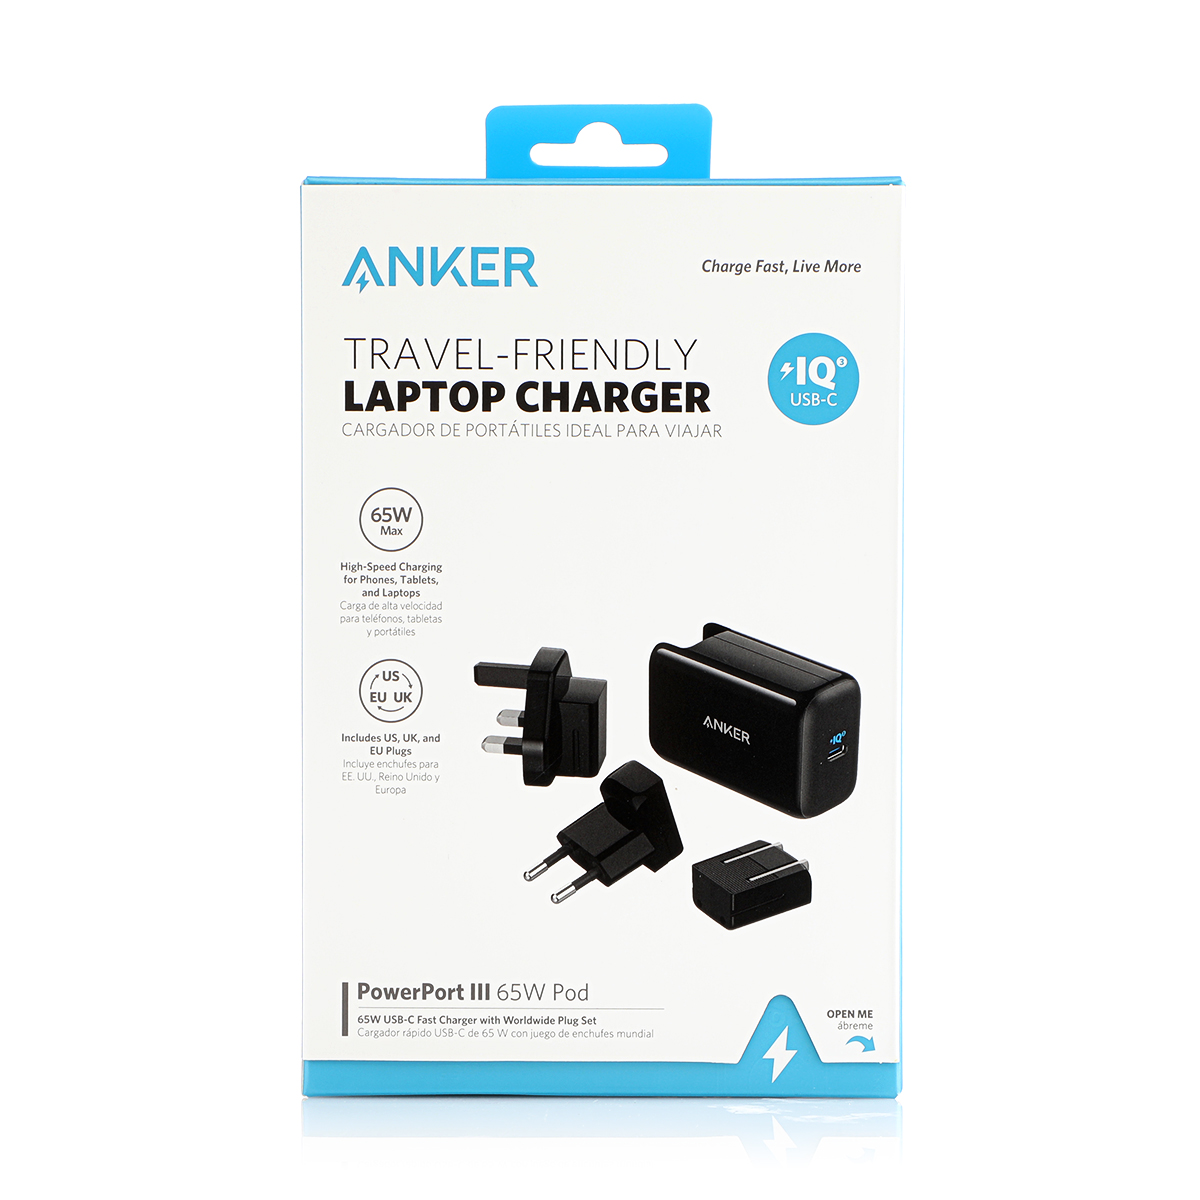 ANKER POWERPORT COMPACT FAST CHARGER 25W - Asia Mobile Phone